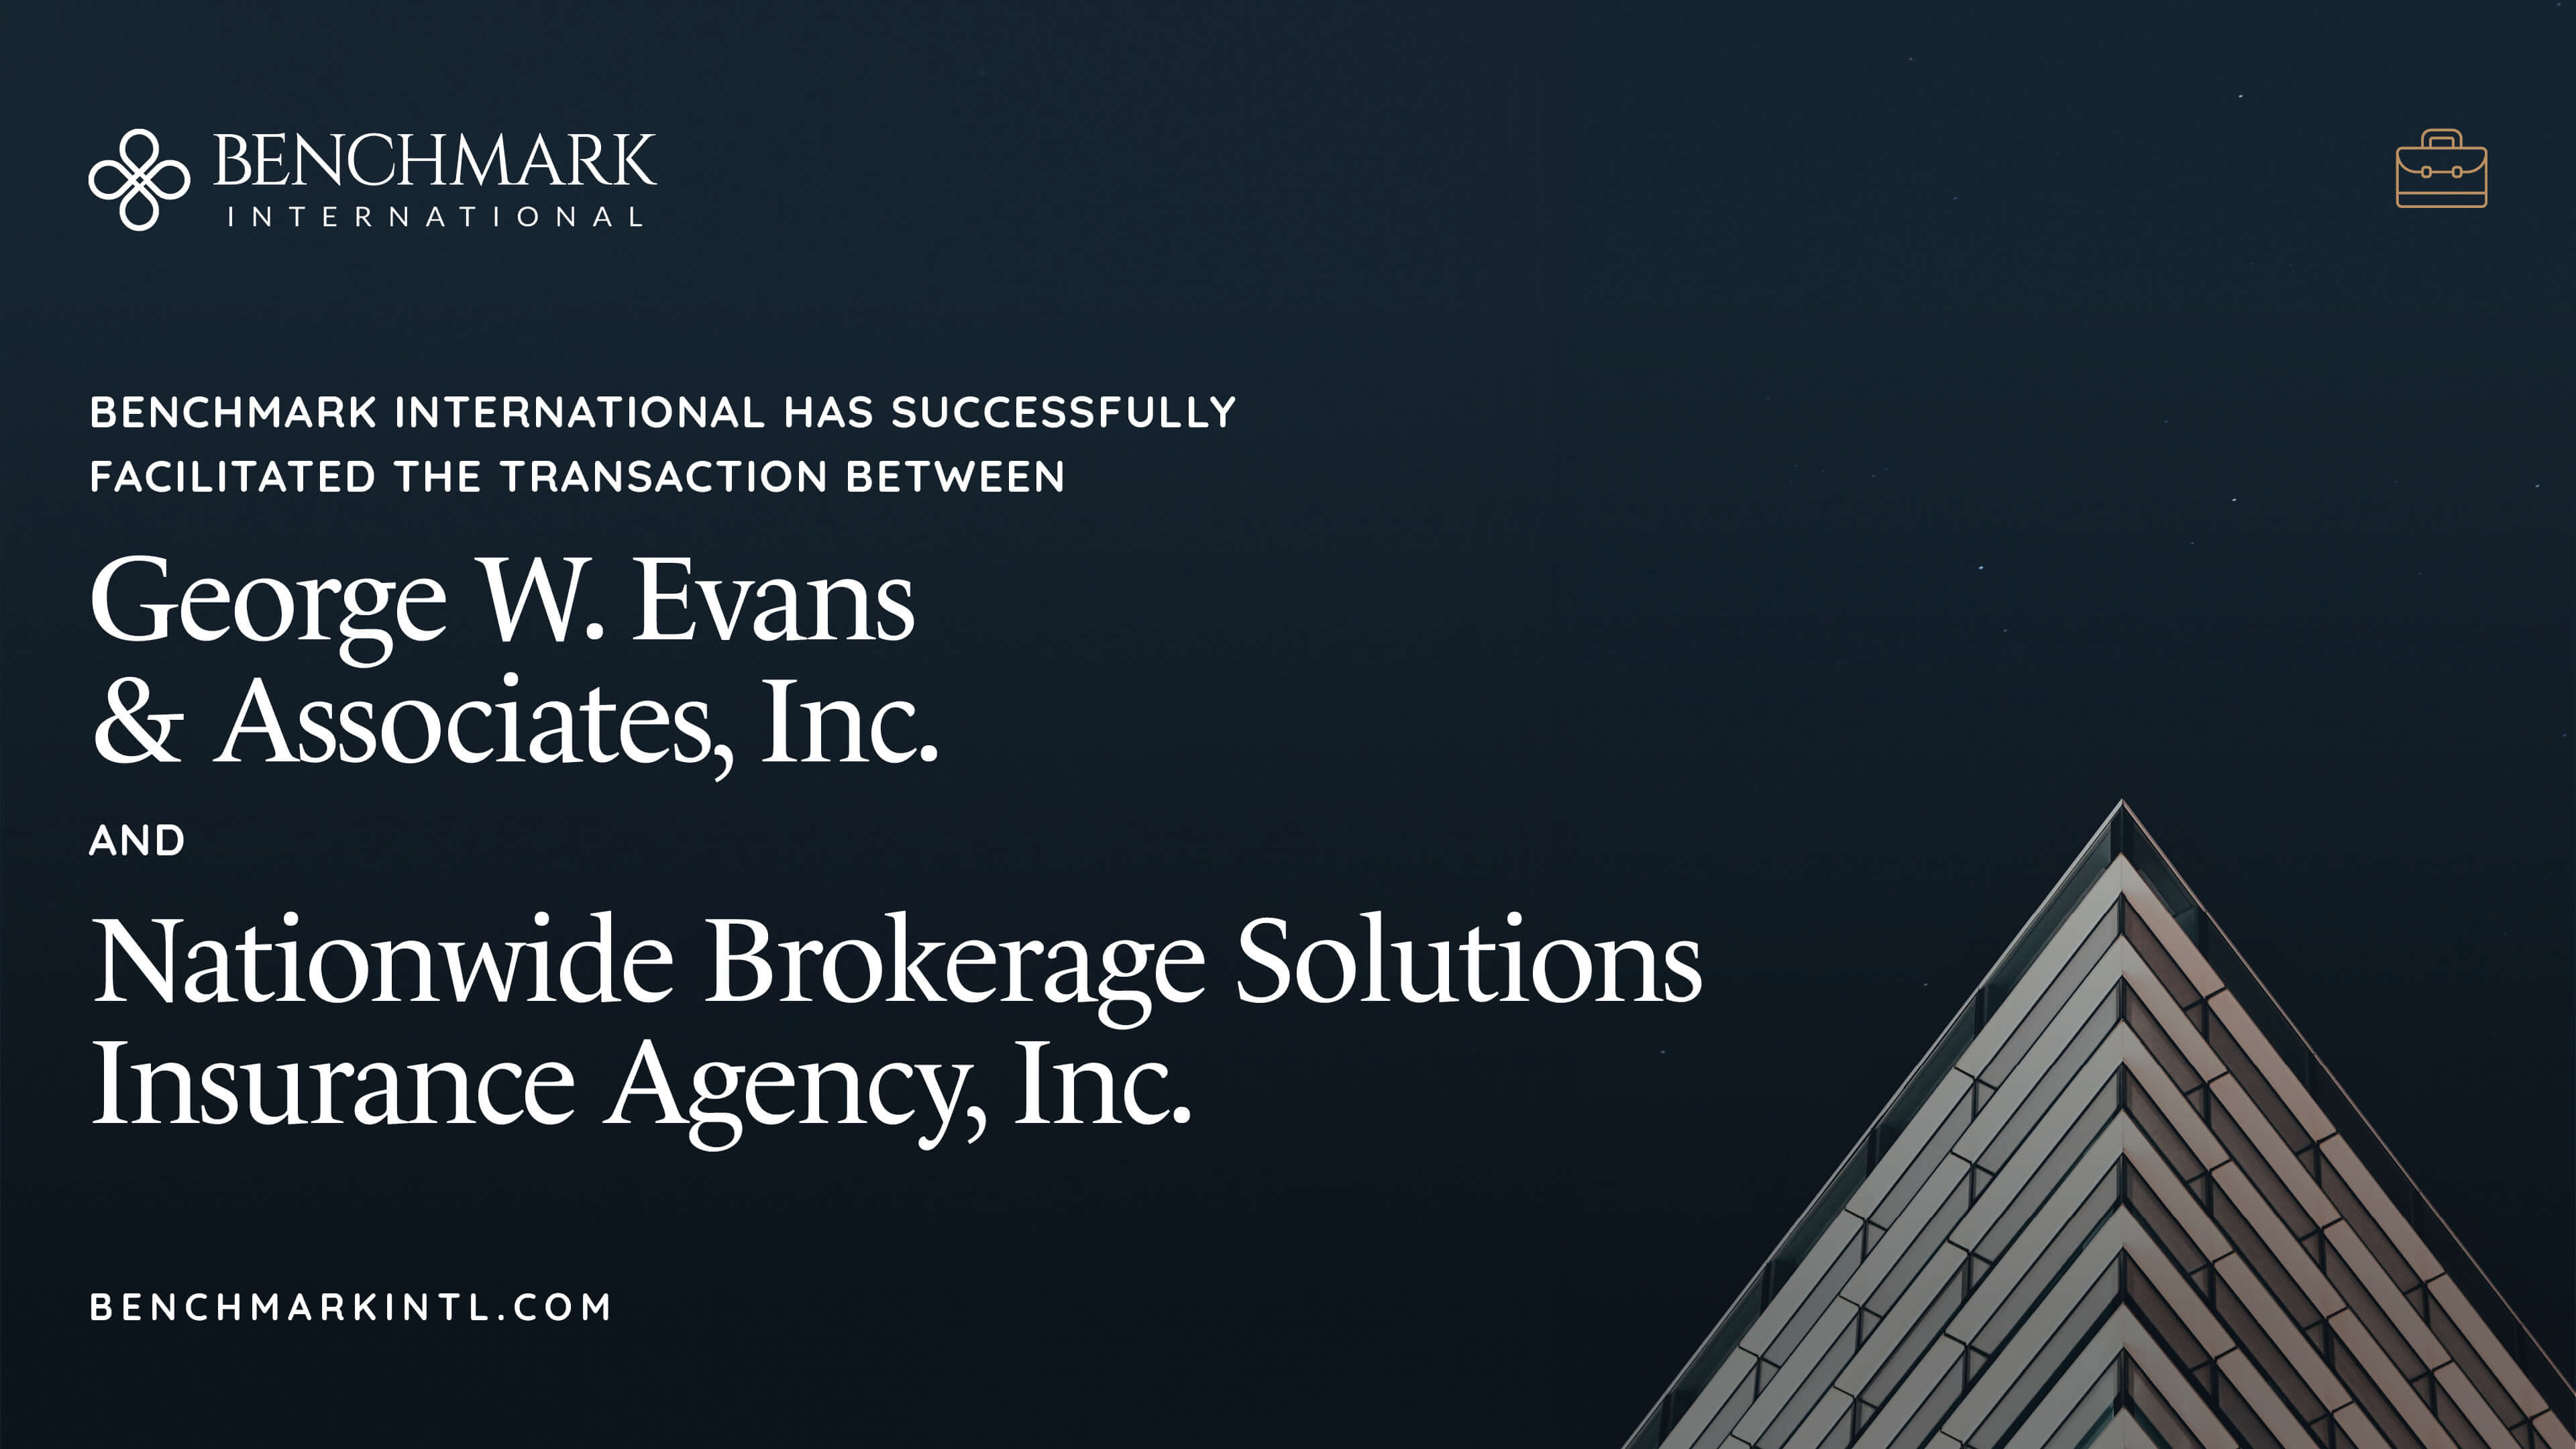 Benchmark International Successfully Facilitated the Transaction Between George W. Evans &amp; Associates, Inc and Nationwide Brokerage Solutions Insurance Agency, Inc.